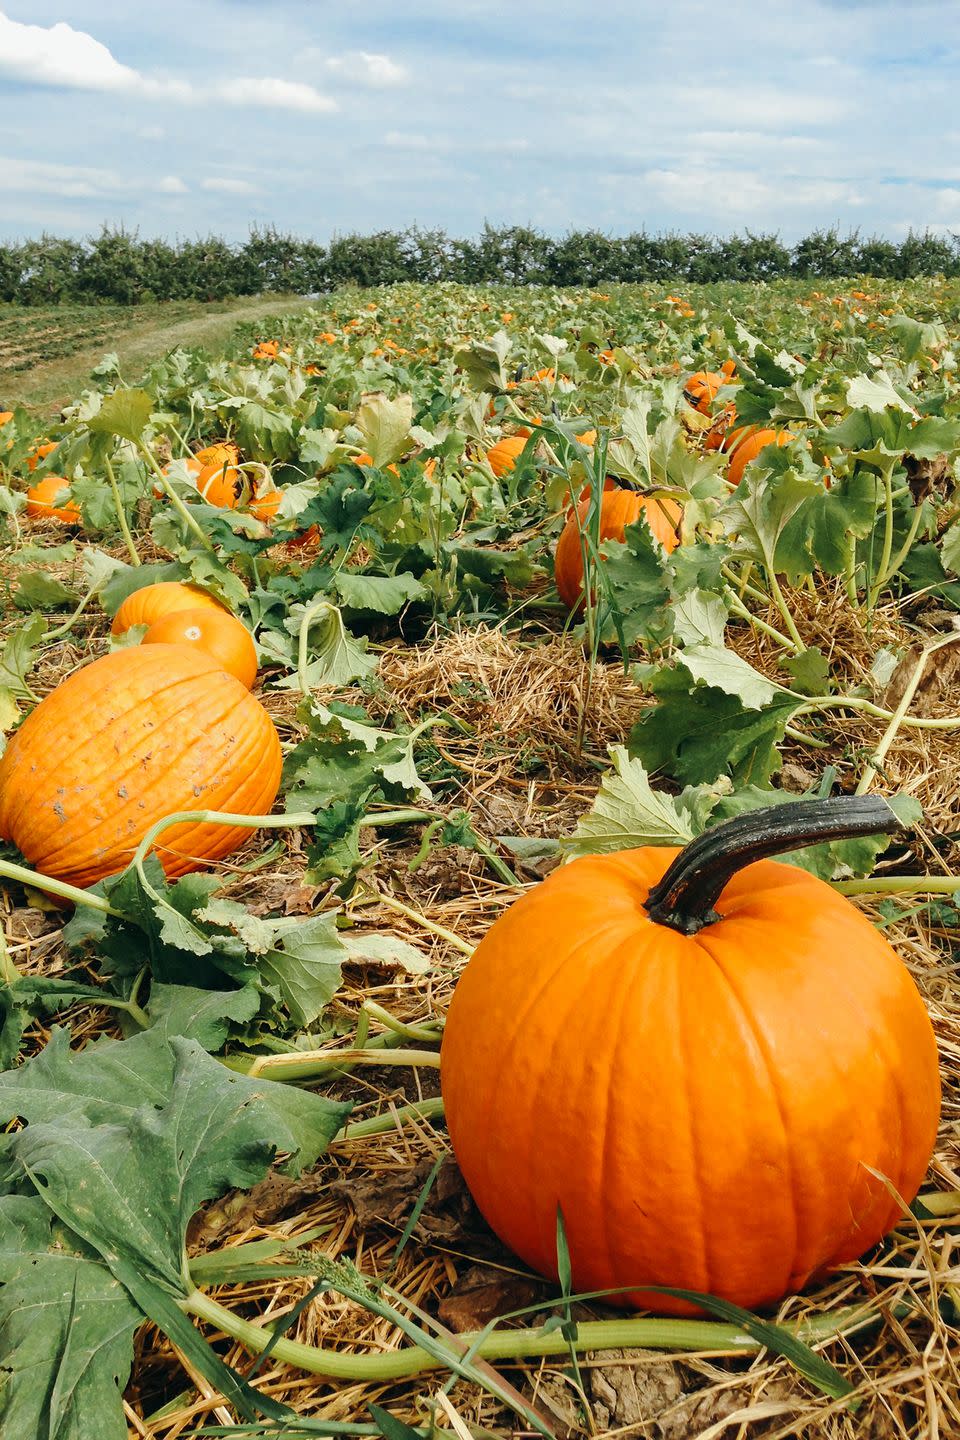 14) McCall's Pumpkin Patch in Moriarty, NM